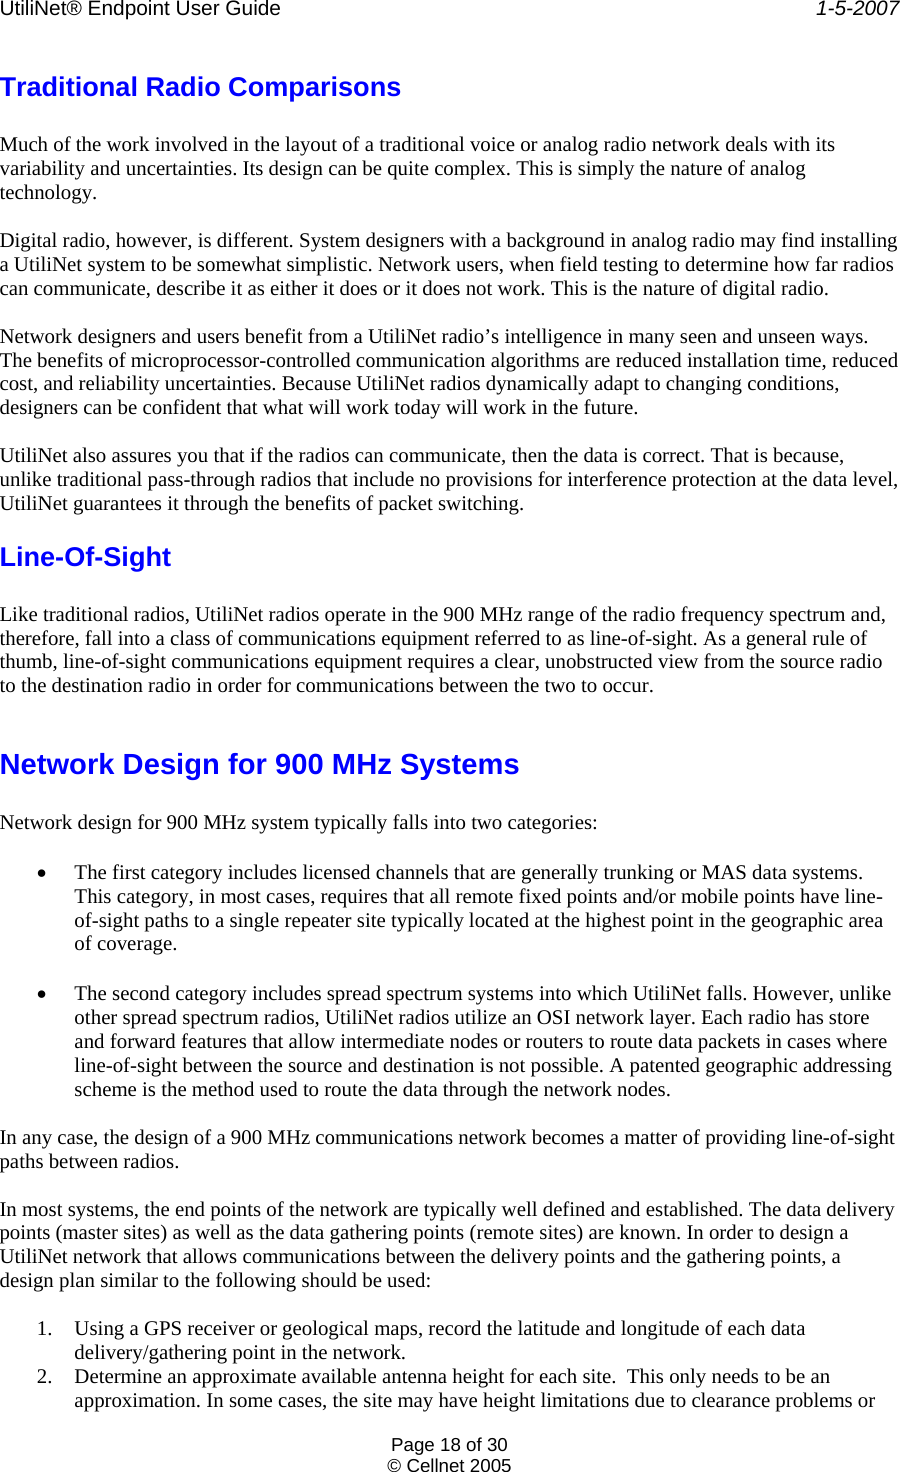 UtiliNet® Endpoint User Guide    1-5-2007 Page 18 of 30 © Cellnet 2005  Traditional Radio Comparisons  Much of the work involved in the layout of a traditional voice or analog radio network deals with its variability and uncertainties. Its design can be quite complex. This is simply the nature of analog technology.  Digital radio, however, is different. System designers with a background in analog radio may find installing a UtiliNet system to be somewhat simplistic. Network users, when field testing to determine how far radios can communicate, describe it as either it does or it does not work. This is the nature of digital radio.  Network designers and users benefit from a UtiliNet radio’s intelligence in many seen and unseen ways. The benefits of microprocessor-controlled communication algorithms are reduced installation time, reduced cost, and reliability uncertainties. Because UtiliNet radios dynamically adapt to changing conditions, designers can be confident that what will work today will work in the future.  UtiliNet also assures you that if the radios can communicate, then the data is correct. That is because, unlike traditional pass-through radios that include no provisions for interference protection at the data level, UtiliNet guarantees it through the benefits of packet switching. Line-Of-Sight  Like traditional radios, UtiliNet radios operate in the 900 MHz range of the radio frequency spectrum and, therefore, fall into a class of communications equipment referred to as line-of-sight. As a general rule of thumb, line-of-sight communications equipment requires a clear, unobstructed view from the source radio to the destination radio in order for communications between the two to occur.  Network Design for 900 MHz Systems  Network design for 900 MHz system typically falls into two categories:  • The first category includes licensed channels that are generally trunking or MAS data systems. This category, in most cases, requires that all remote fixed points and/or mobile points have line-of-sight paths to a single repeater site typically located at the highest point in the geographic area of coverage.  • The second category includes spread spectrum systems into which UtiliNet falls. However, unlike other spread spectrum radios, UtiliNet radios utilize an OSI network layer. Each radio has store and forward features that allow intermediate nodes or routers to route data packets in cases where line-of-sight between the source and destination is not possible. A patented geographic addressing scheme is the method used to route the data through the network nodes.  In any case, the design of a 900 MHz communications network becomes a matter of providing line-of-sight paths between radios.  In most systems, the end points of the network are typically well defined and established. The data delivery points (master sites) as well as the data gathering points (remote sites) are known. In order to design a UtiliNet network that allows communications between the delivery points and the gathering points, a design plan similar to the following should be used:  1. Using a GPS receiver or geological maps, record the latitude and longitude of each data delivery/gathering point in the network. 2. Determine an approximate available antenna height for each site.  This only needs to be an approximation. In some cases, the site may have height limitations due to clearance problems or 